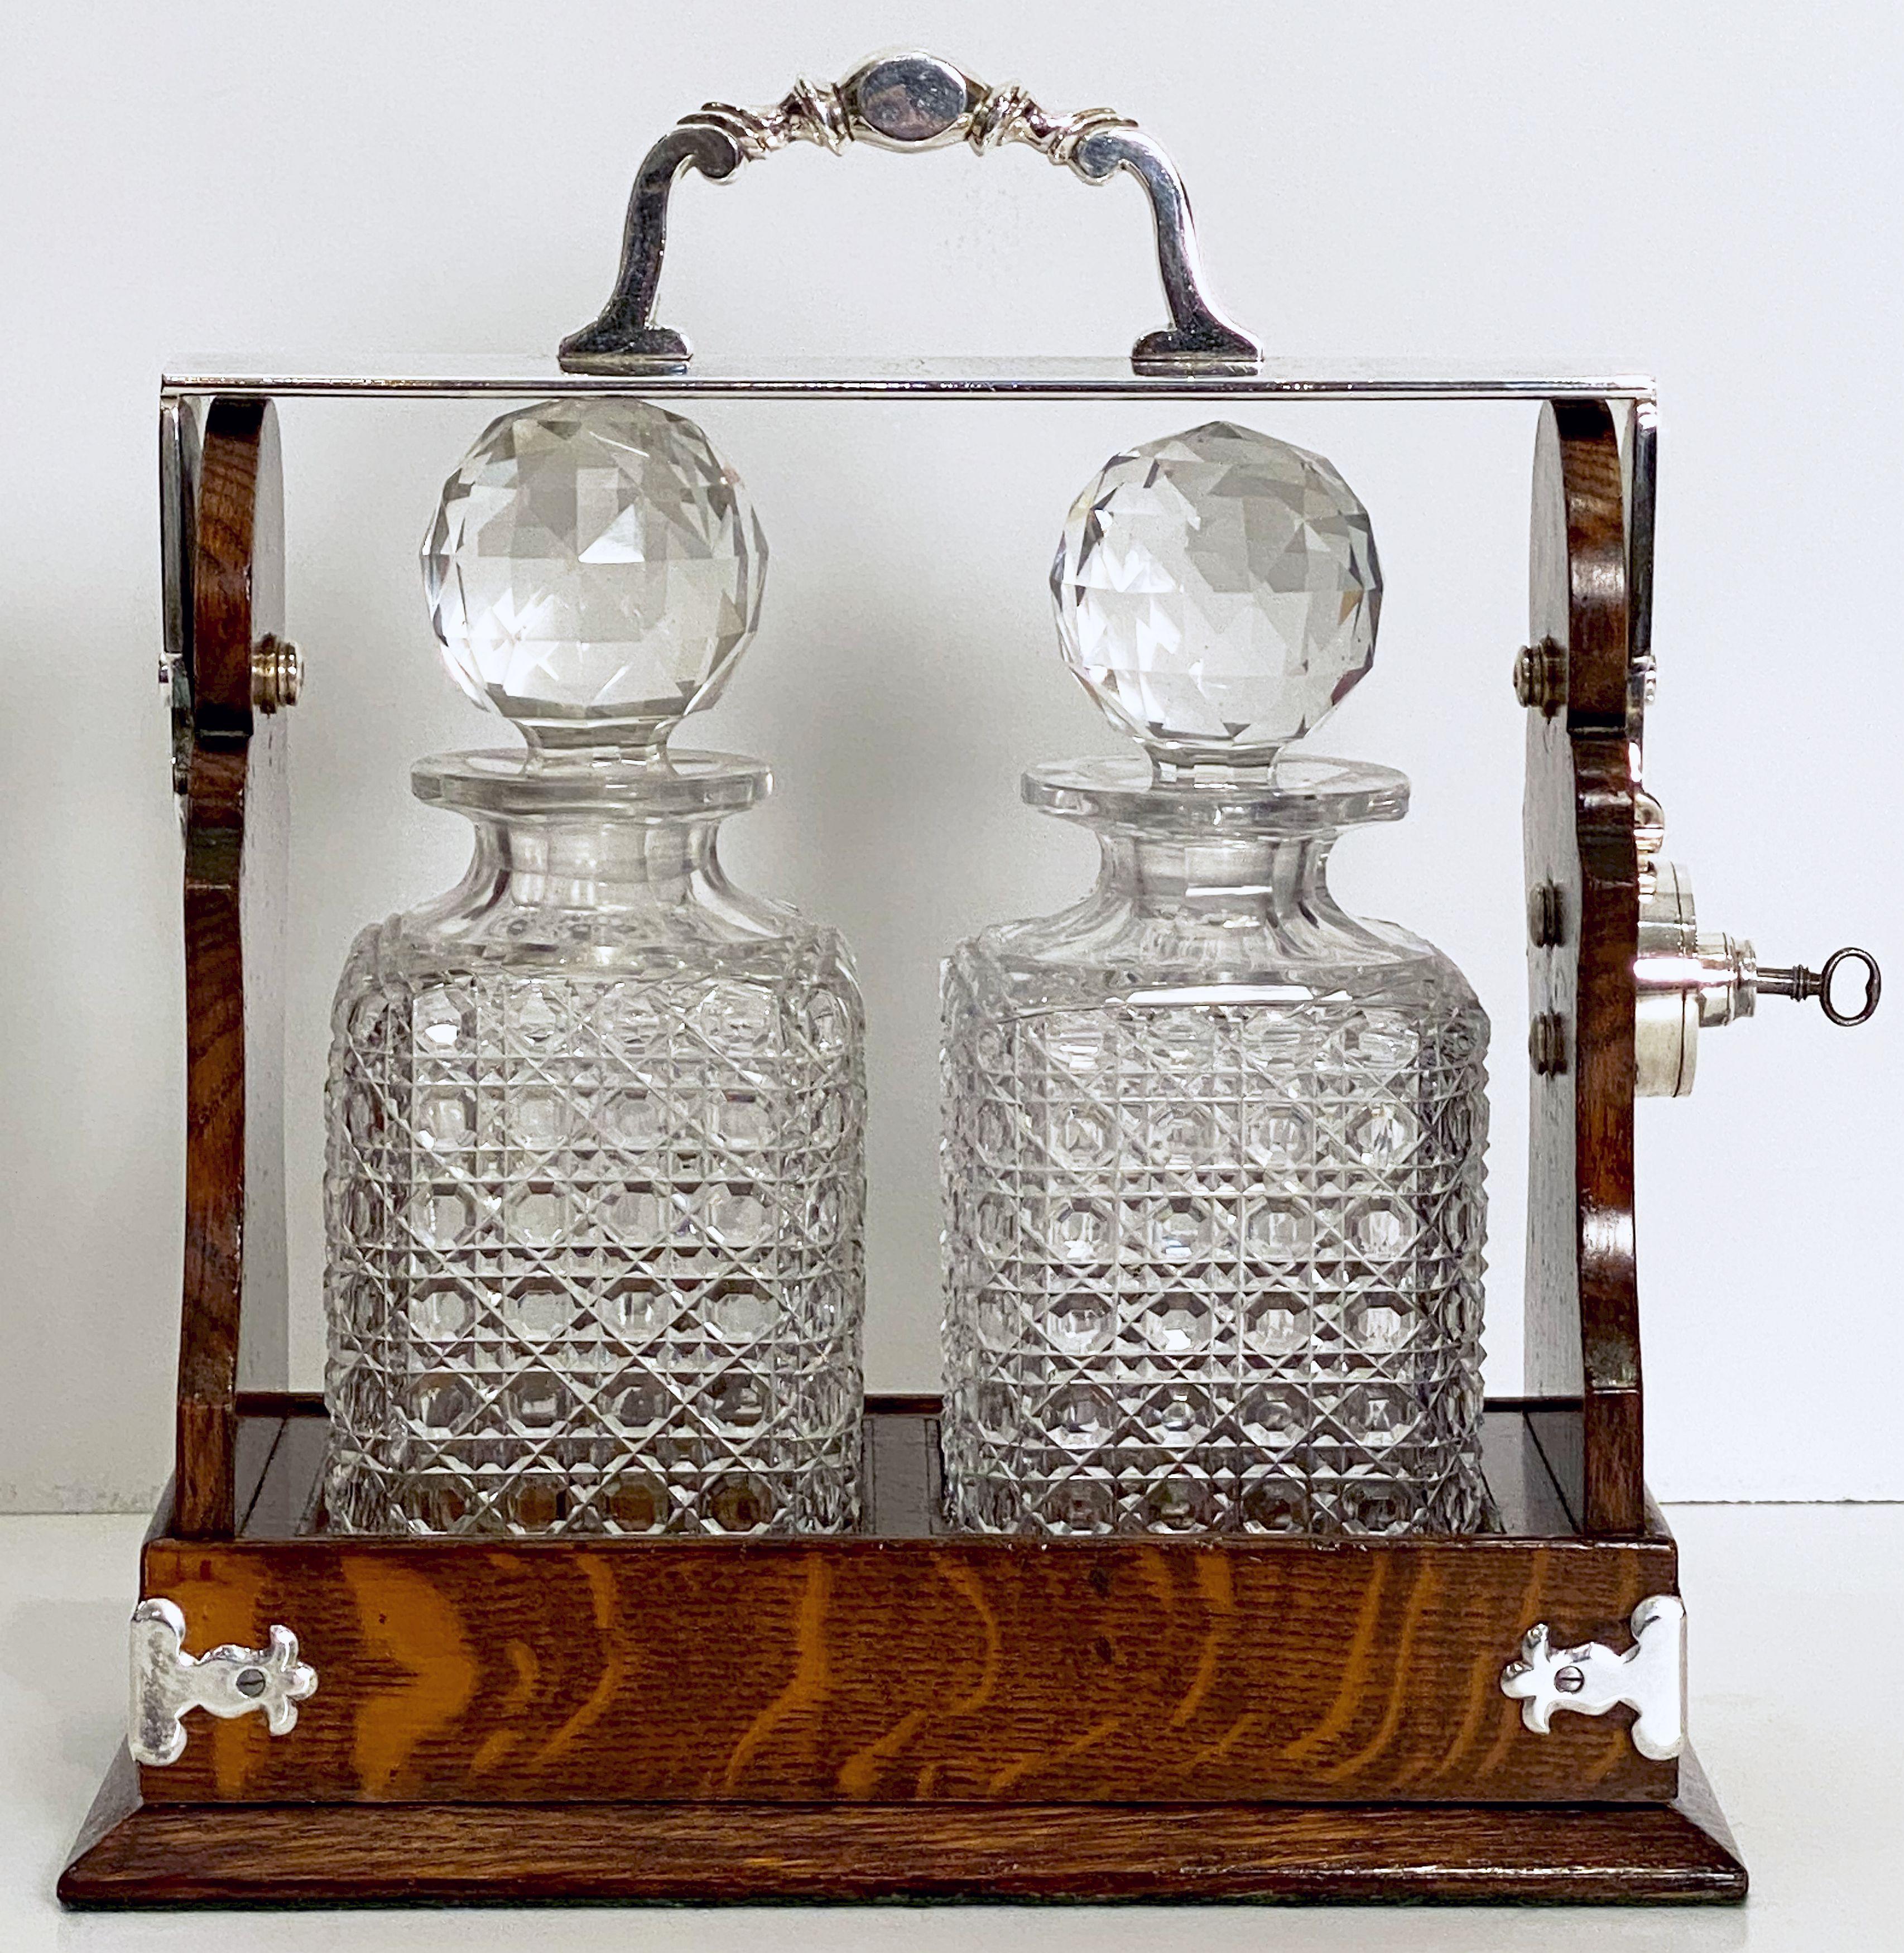 A fine Betjemann's patent tantalus drinks or spirits two-bottle decanter set of oak and silver from Edwardian era England

The tantalus has a silver plated handle and locking mechanism, the hobnail decanters are square in shape and heavily cut